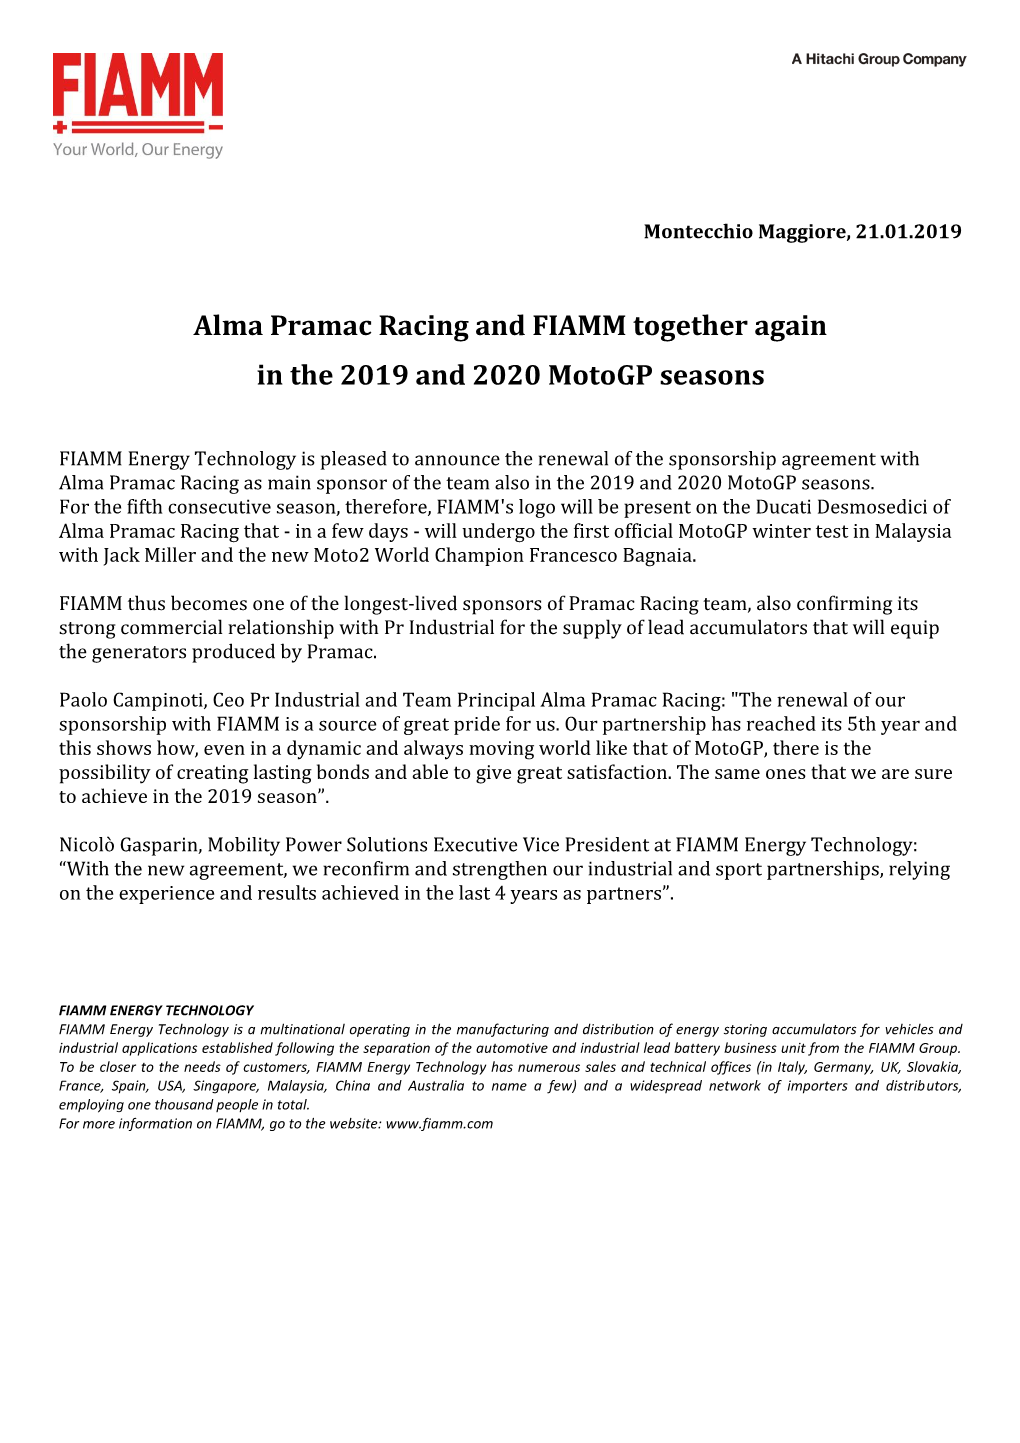 Alma Pramac Racing and FIAMM Together Again in the 2019 and 2020 Motogp Seasons